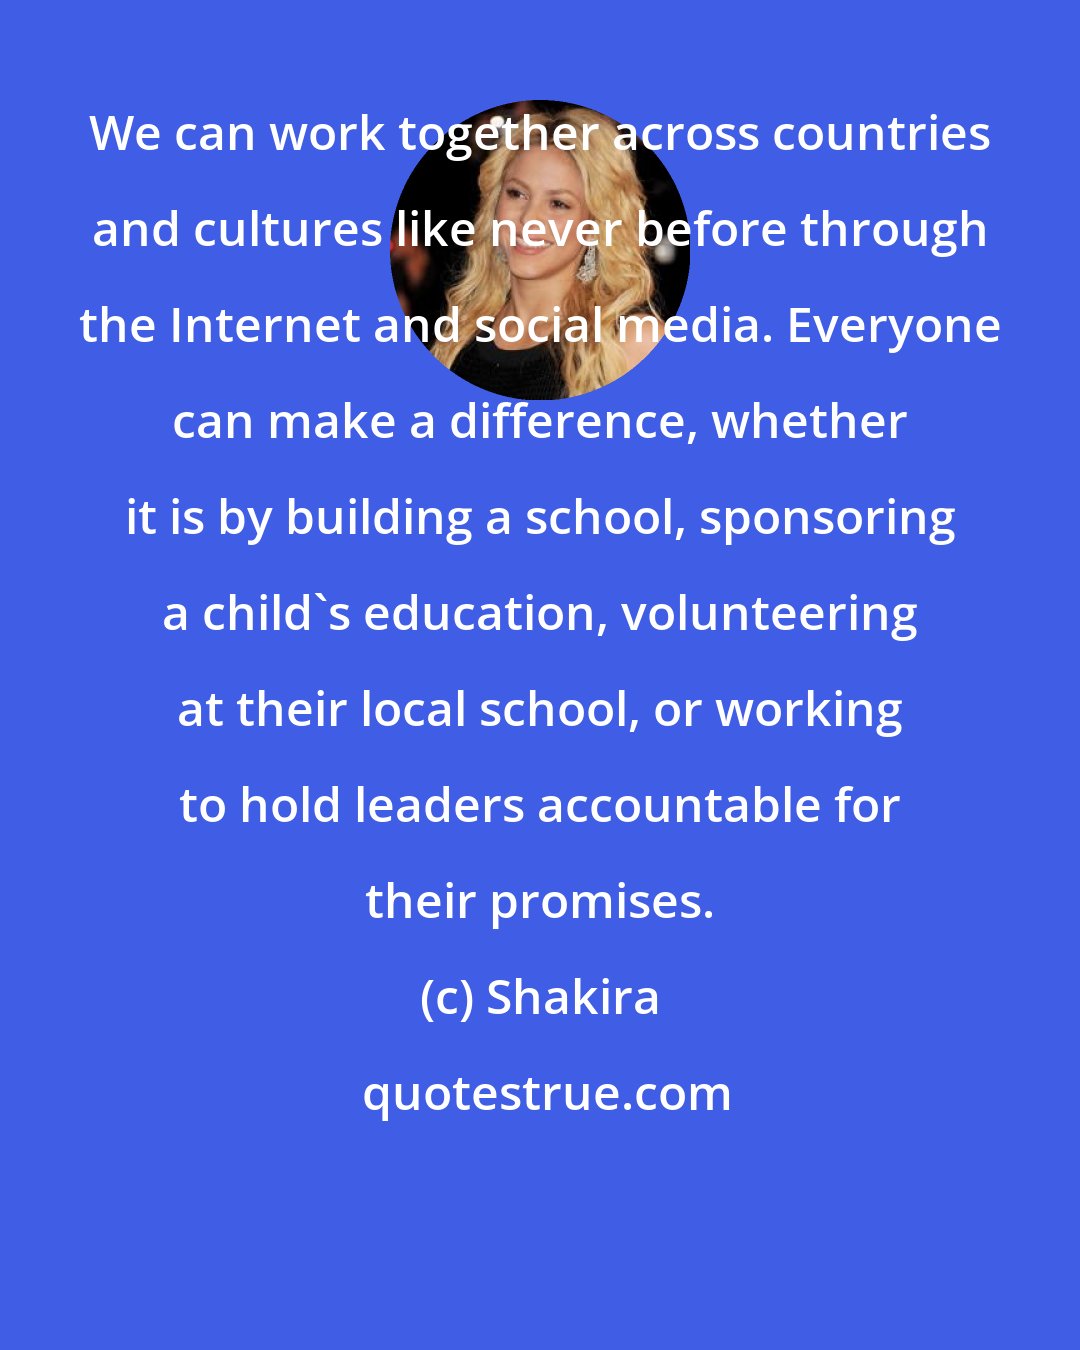 Shakira: We can work together across countries and cultures like never before through the Internet and social media. Everyone can make a difference, whether it is by building a school, sponsoring a child's education, volunteering at their local school, or working to hold leaders accountable for their promises.